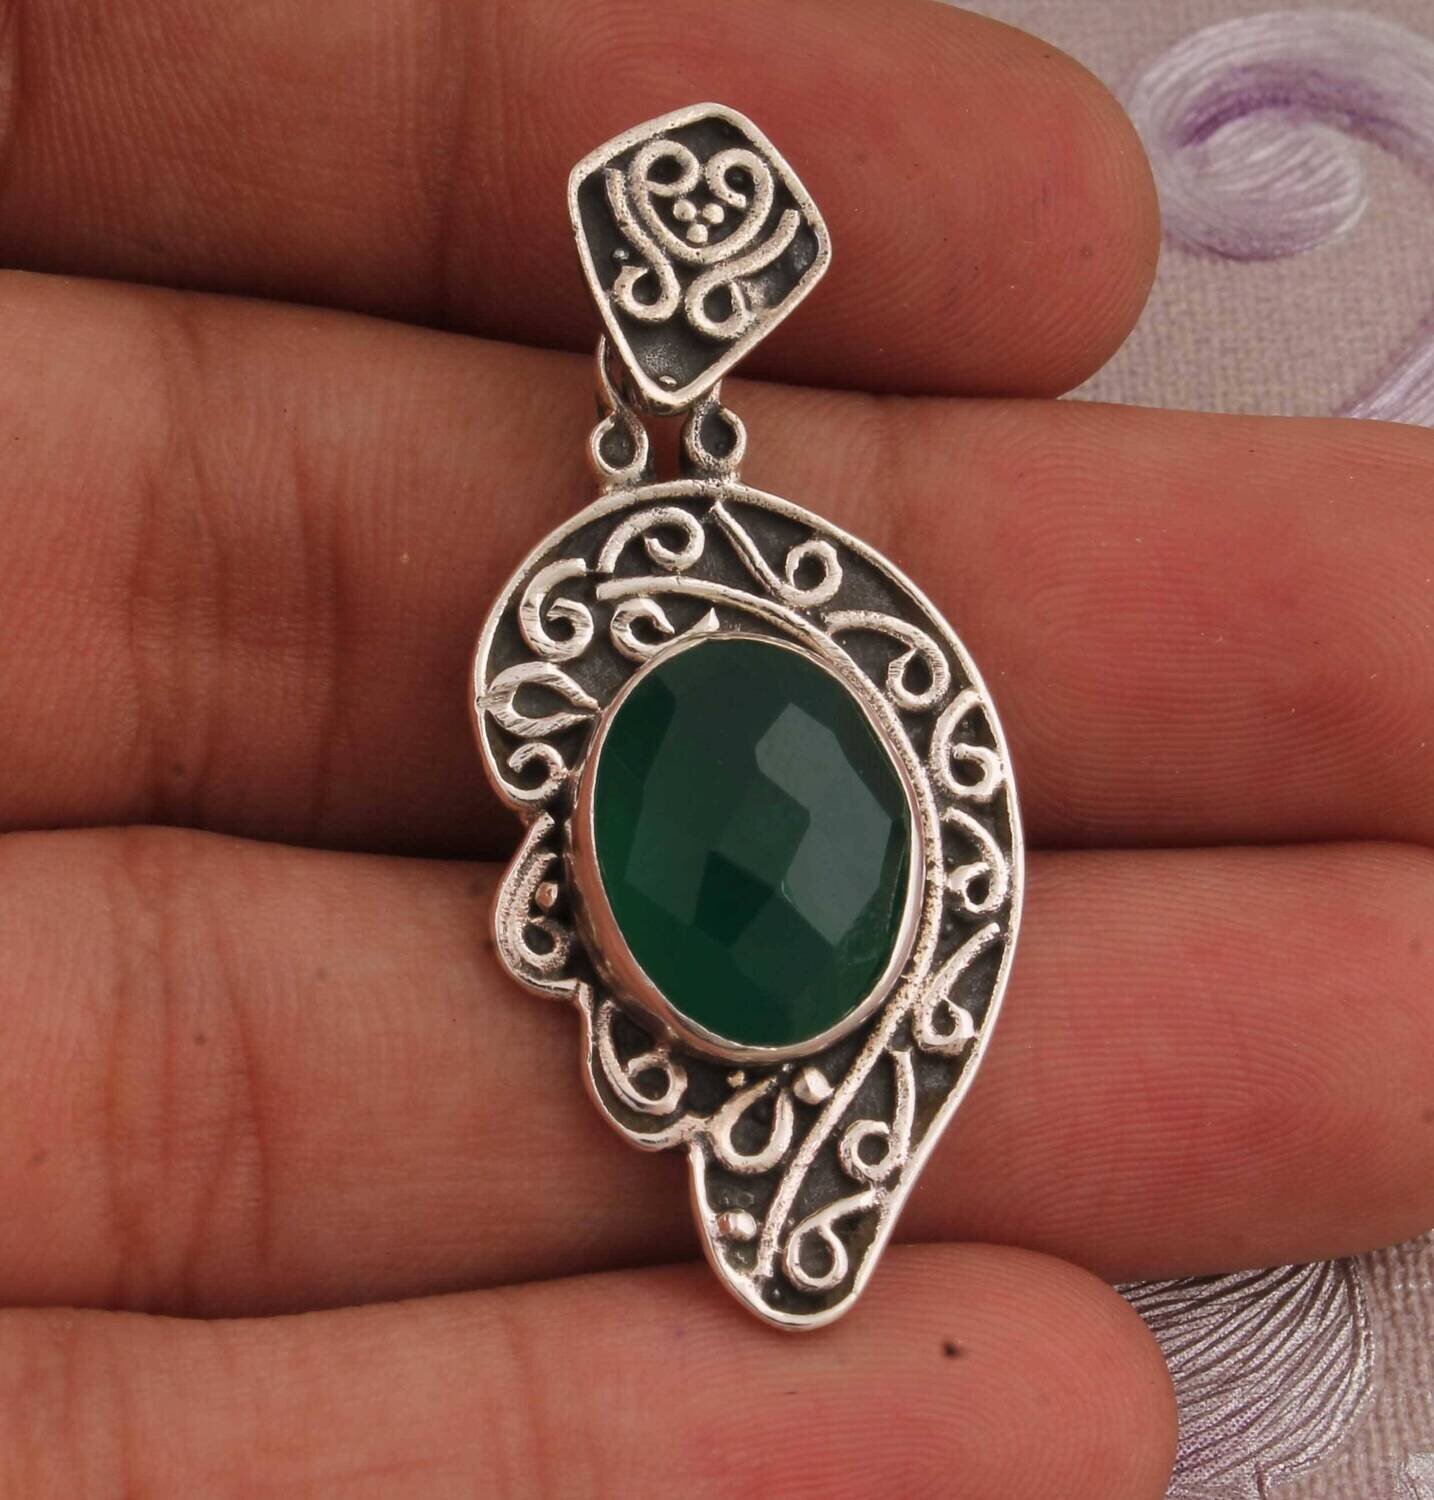 Natural Green Onyx AAA+Quality Gemstone Pendant 925-Antique Solid Silver Pendant,Sterling Silver Pendant,Leaf Pendant,Gift for HerCyber2021